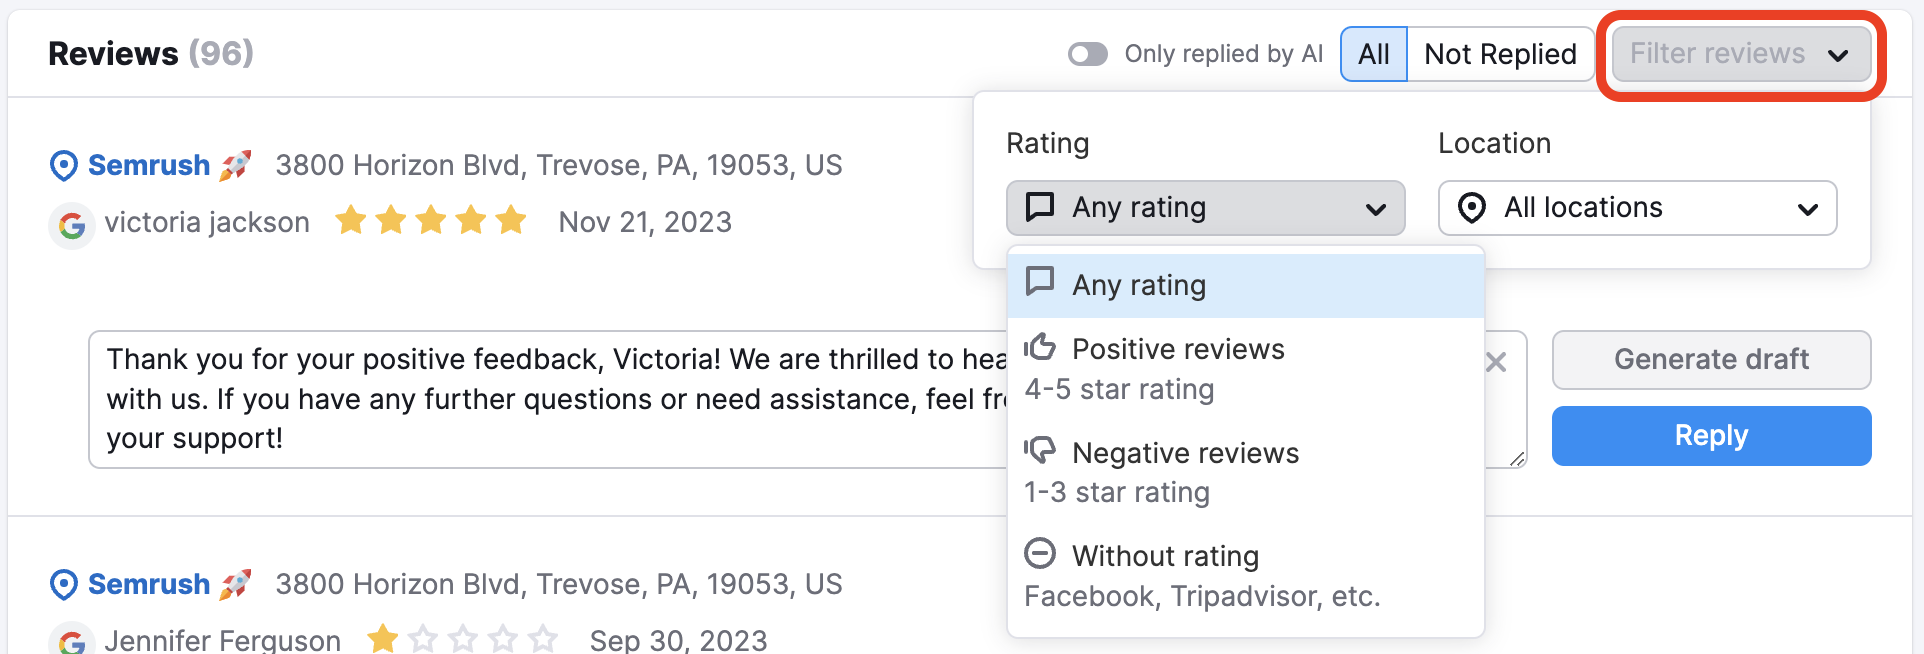 The Reviews table highlighting the available filters. 